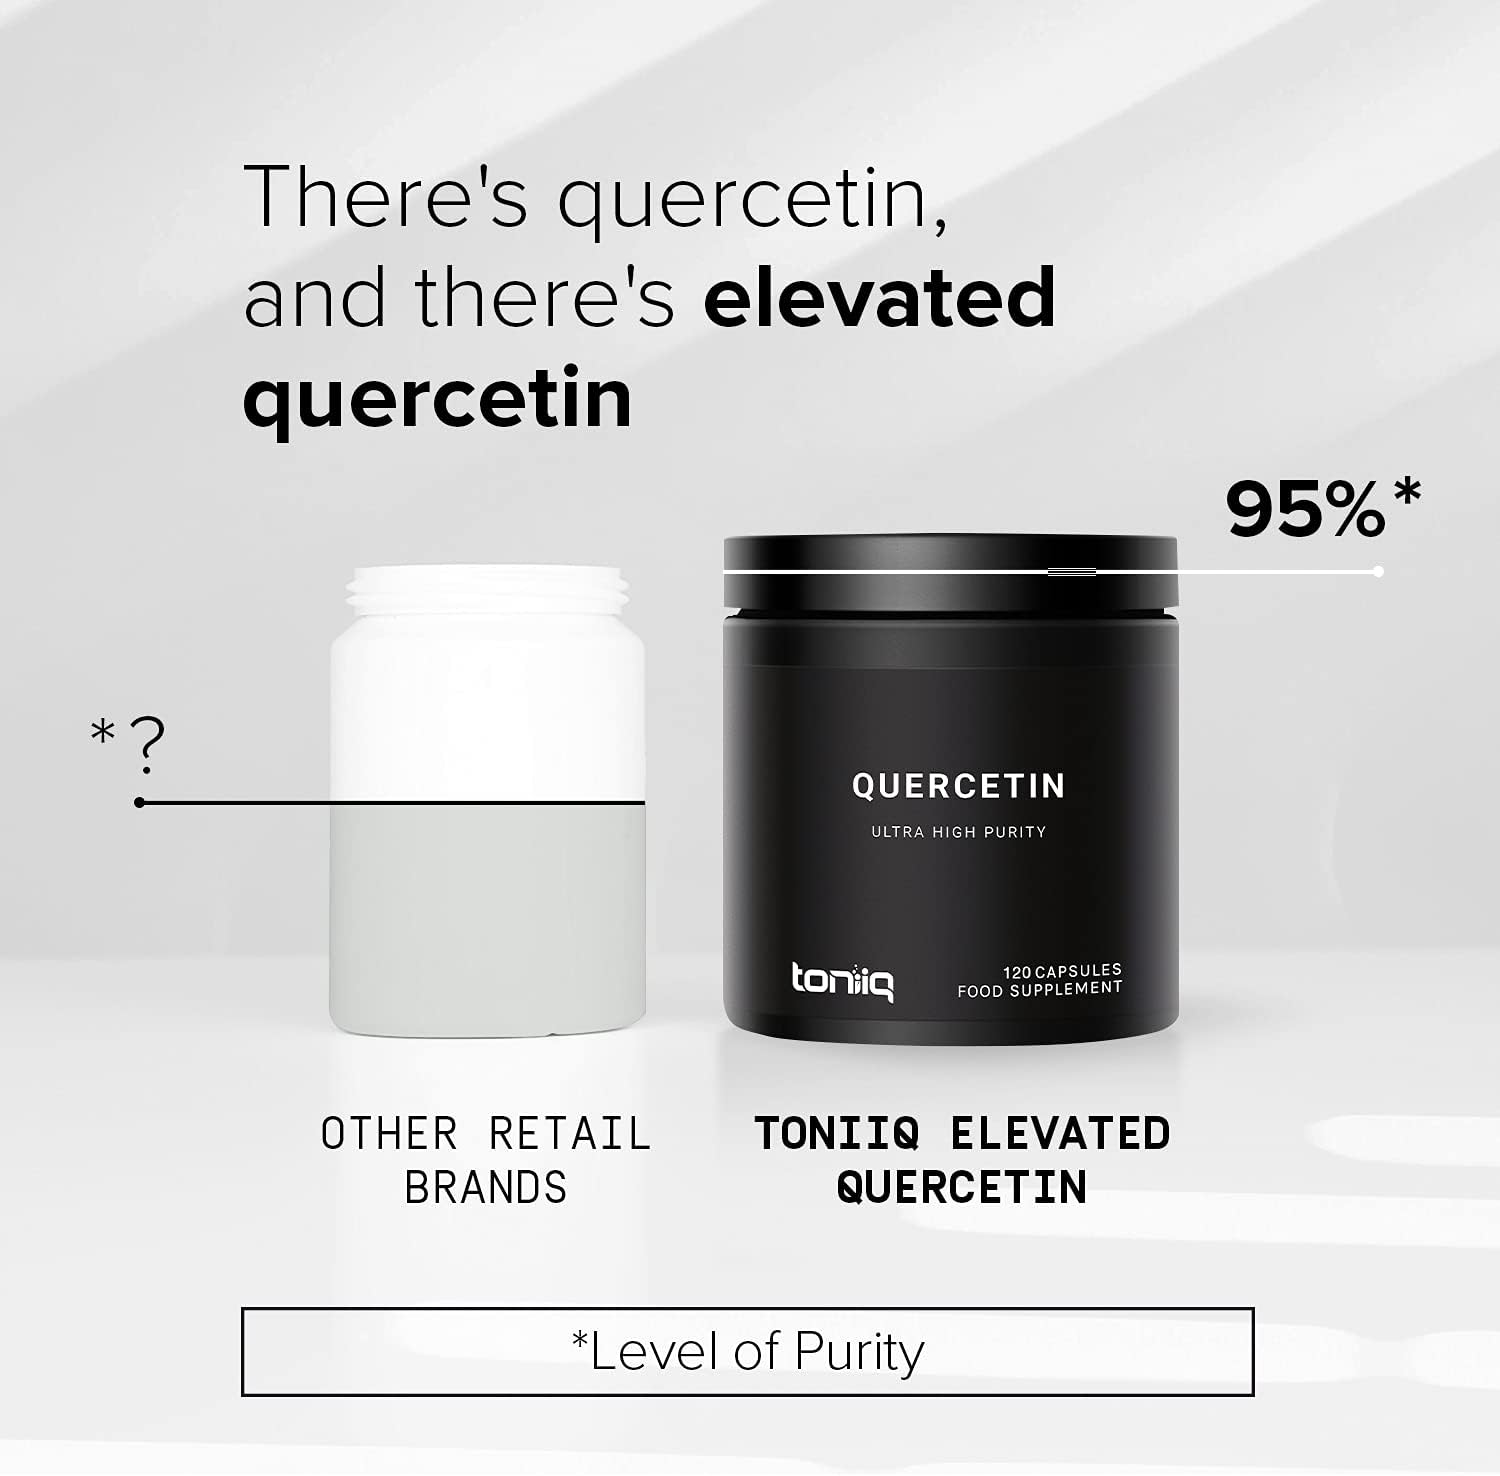 Ultra High Purity Quercetin Capsules - 95%+ Highly Purified and Bioava